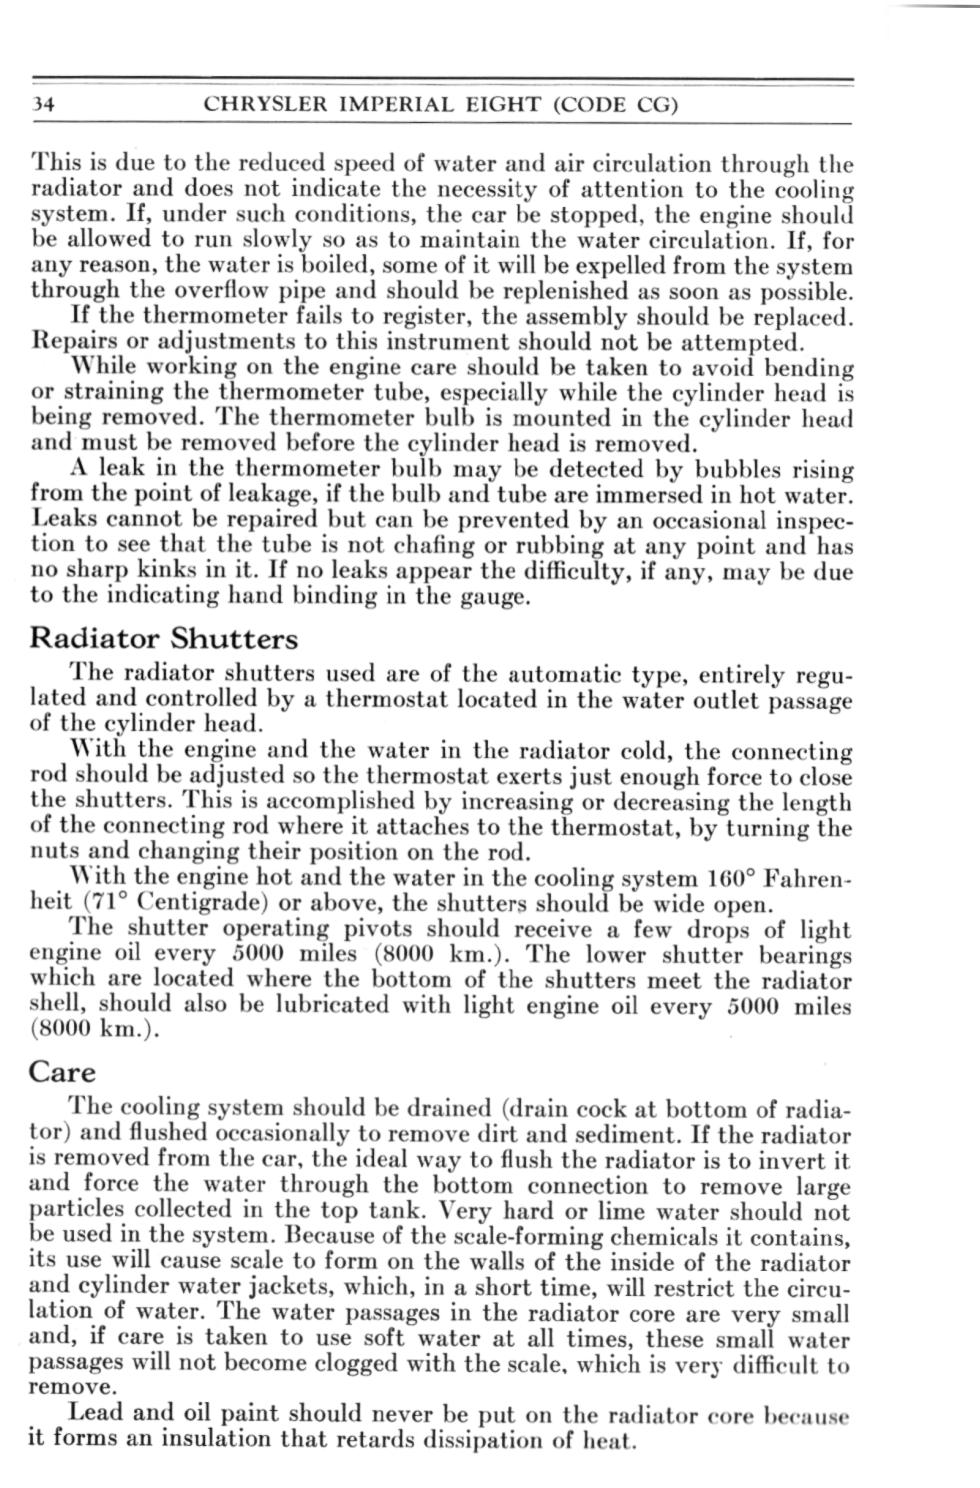 1931 Chrysler Imperial Owners Manual Page 39